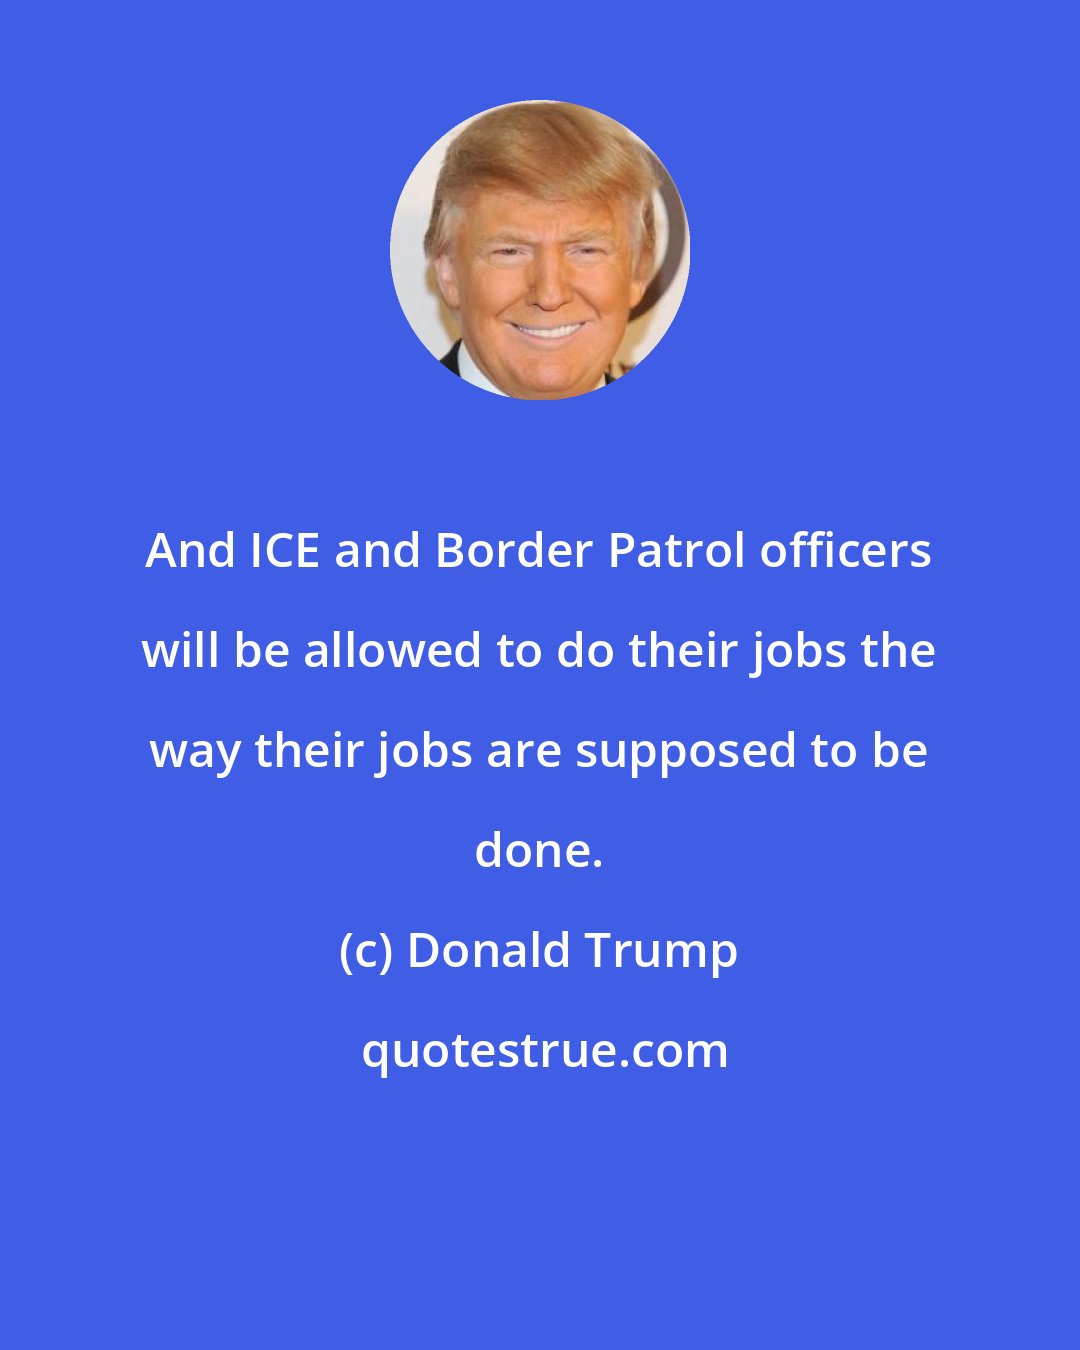 Donald Trump: And ICE and Border Patrol officers will be allowed to do their jobs the way their jobs are supposed to be done.